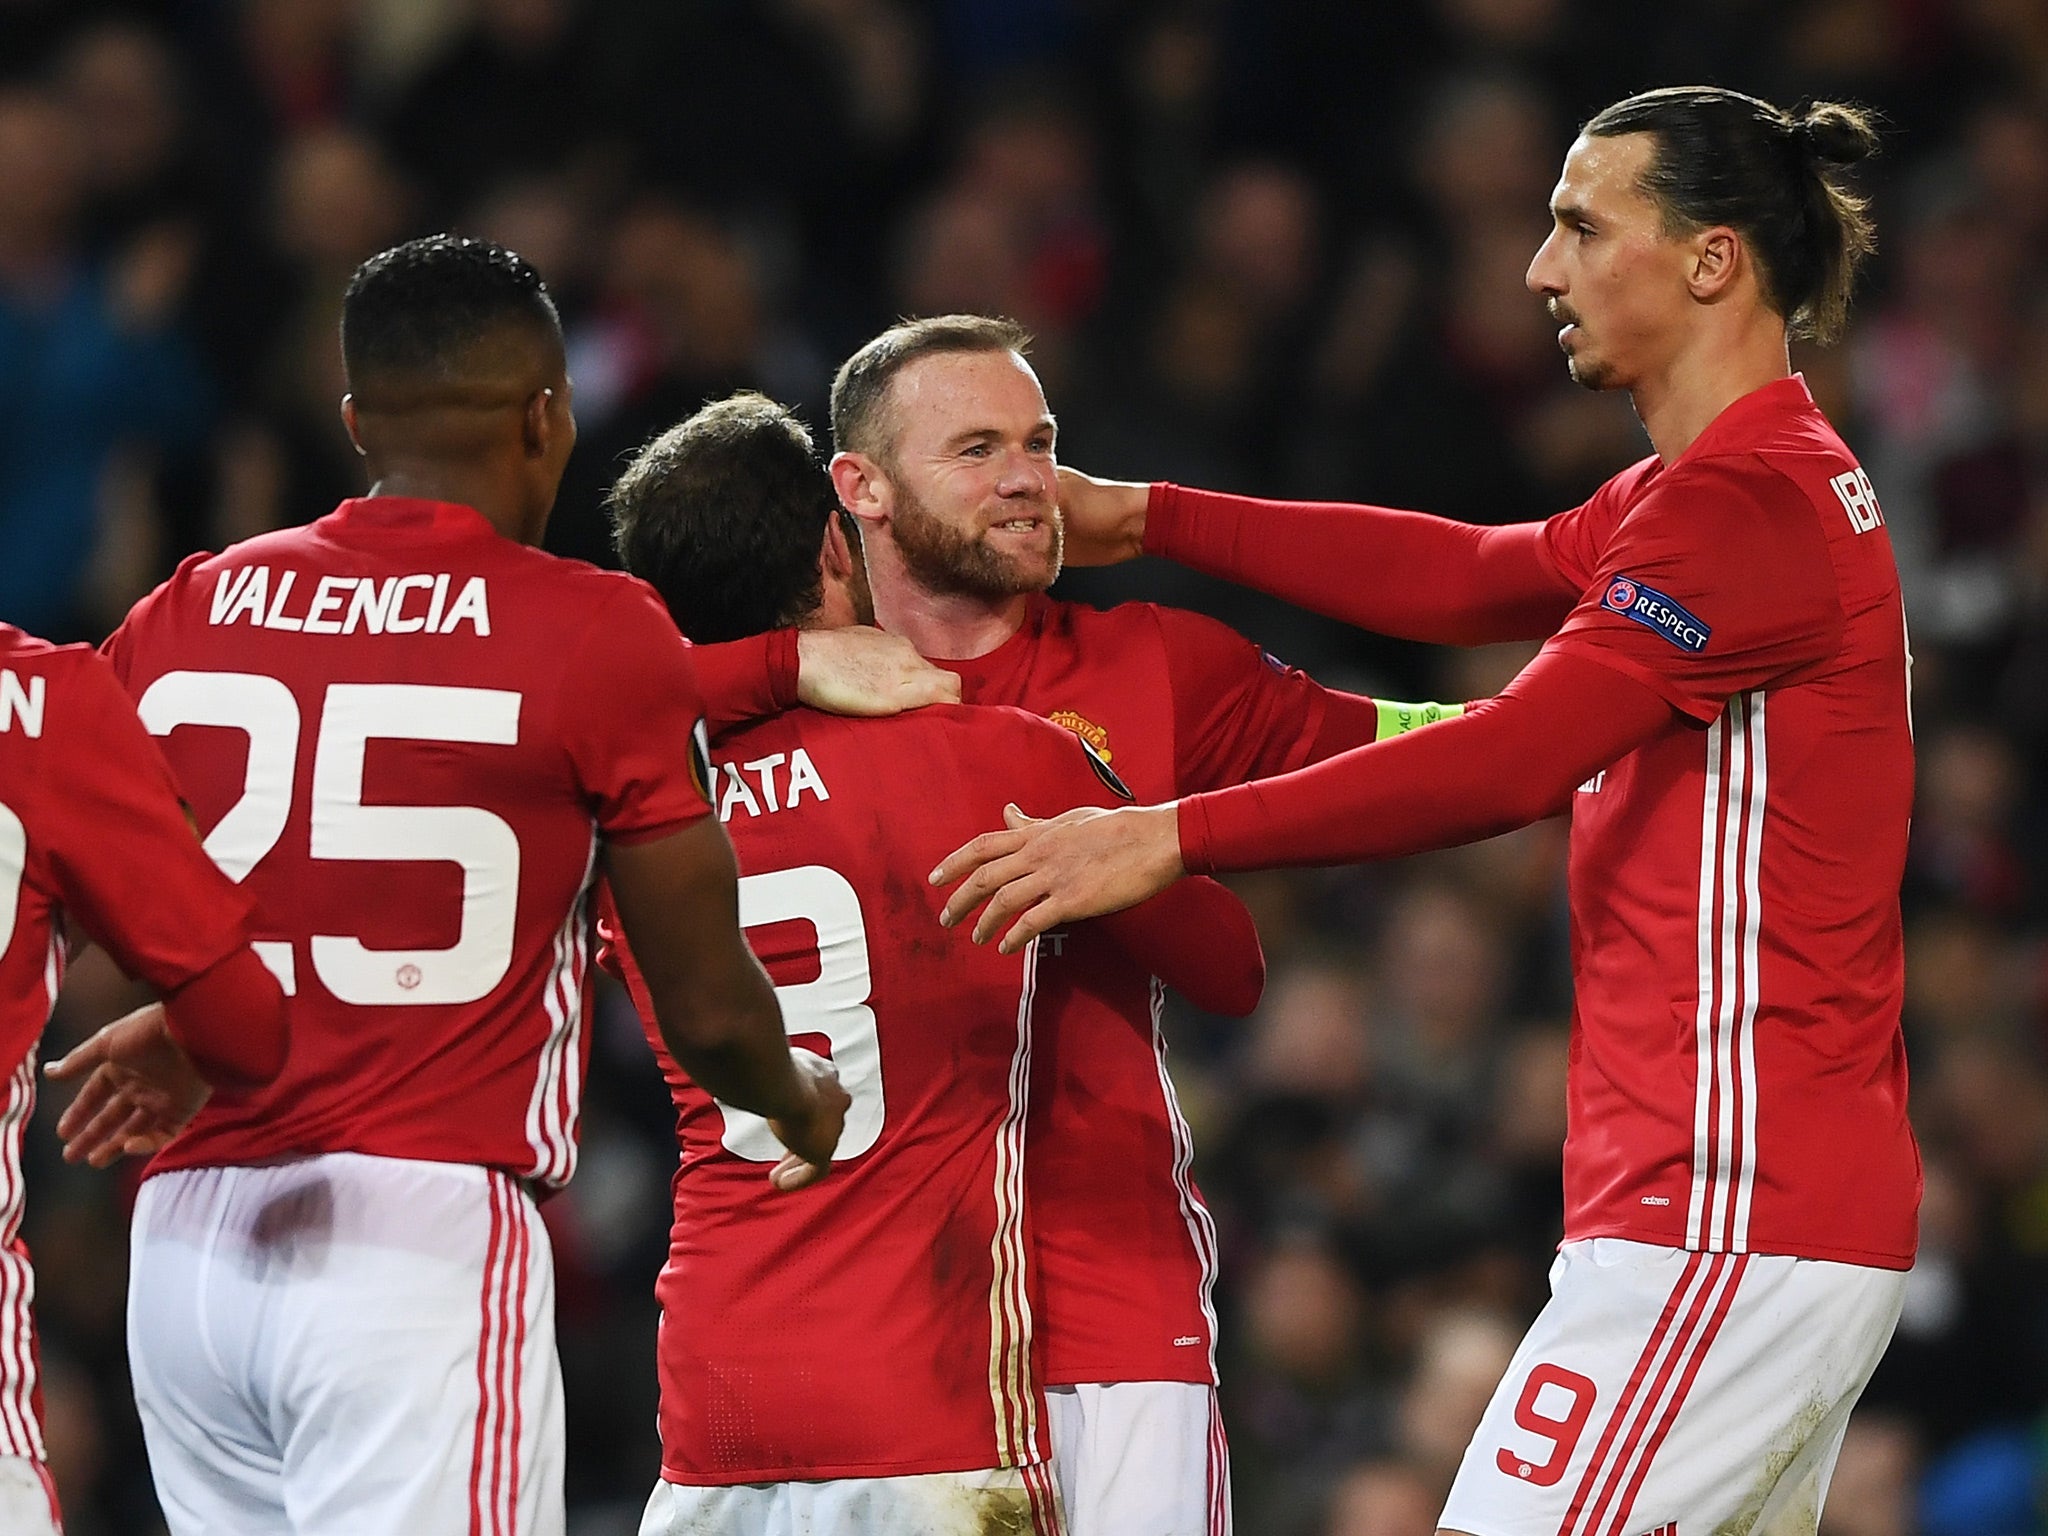 Rooney was instrumental in a comfortable victory for United